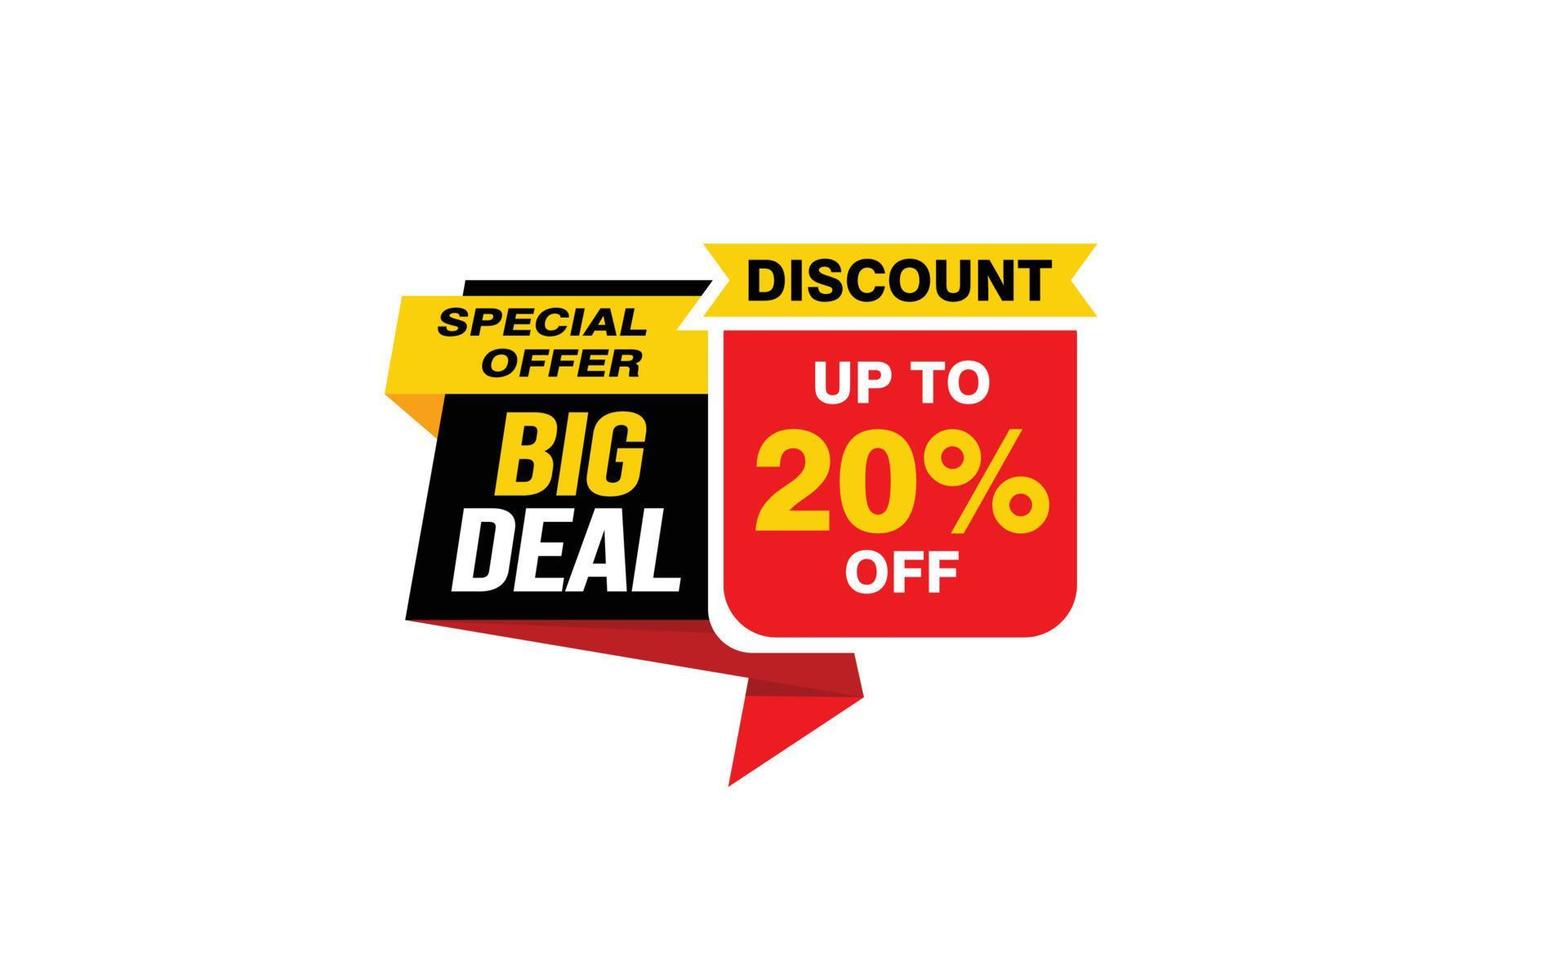 20 Percent BIG DEAL offer, clearance, promotion banner layout with sticker style. vector